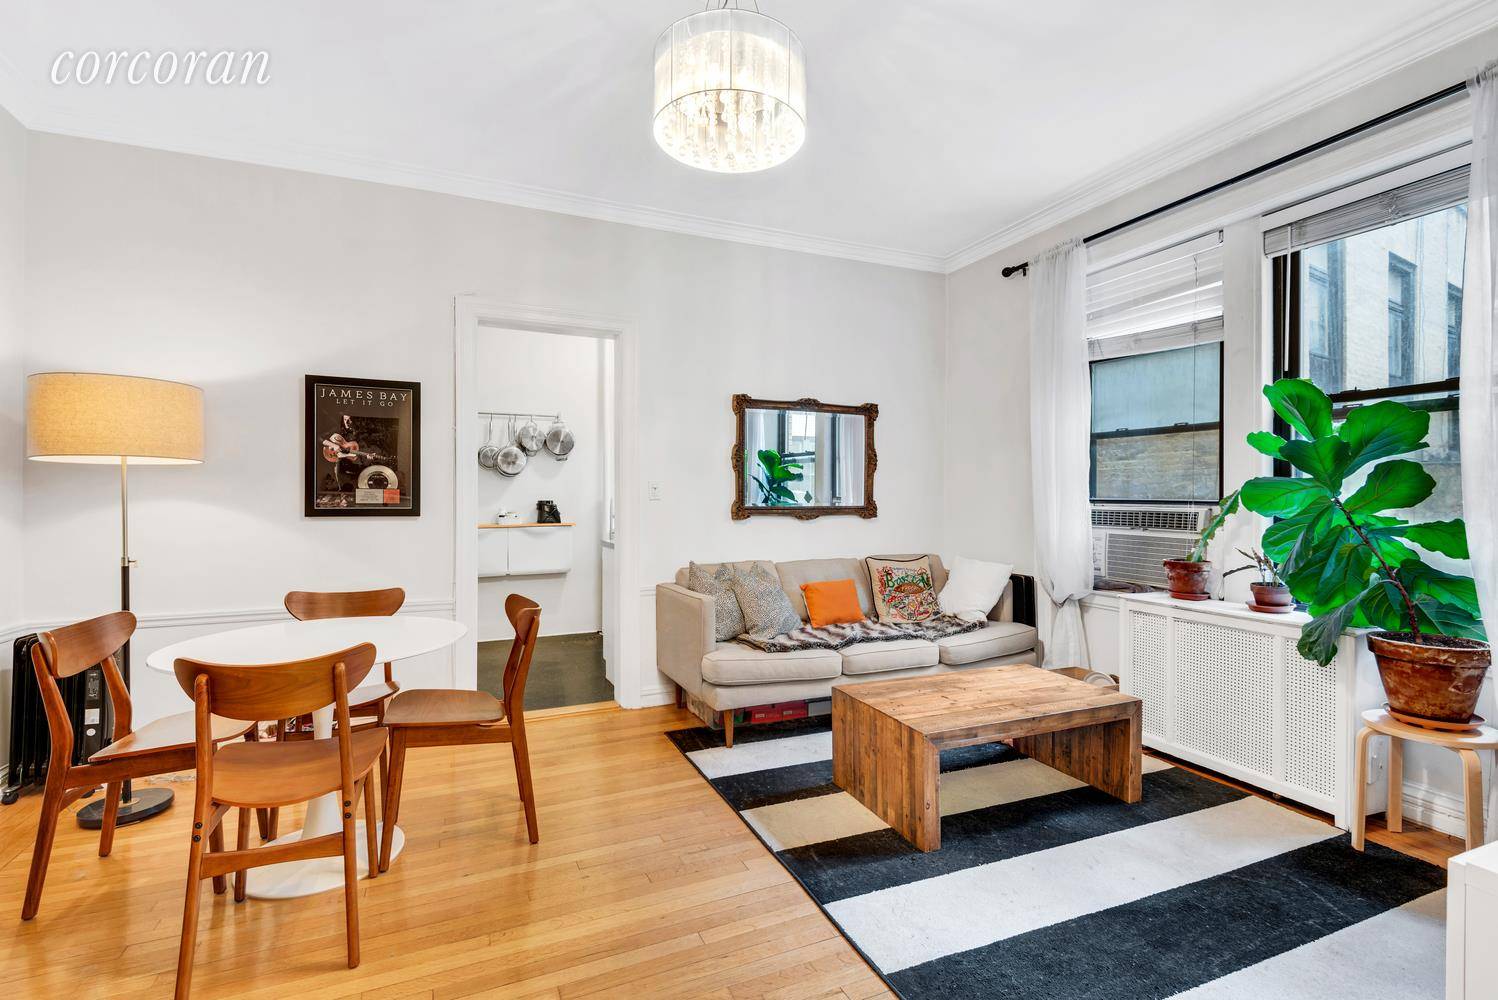 Charming one bedroom apartment in one of New York's most historic neighborhoods.